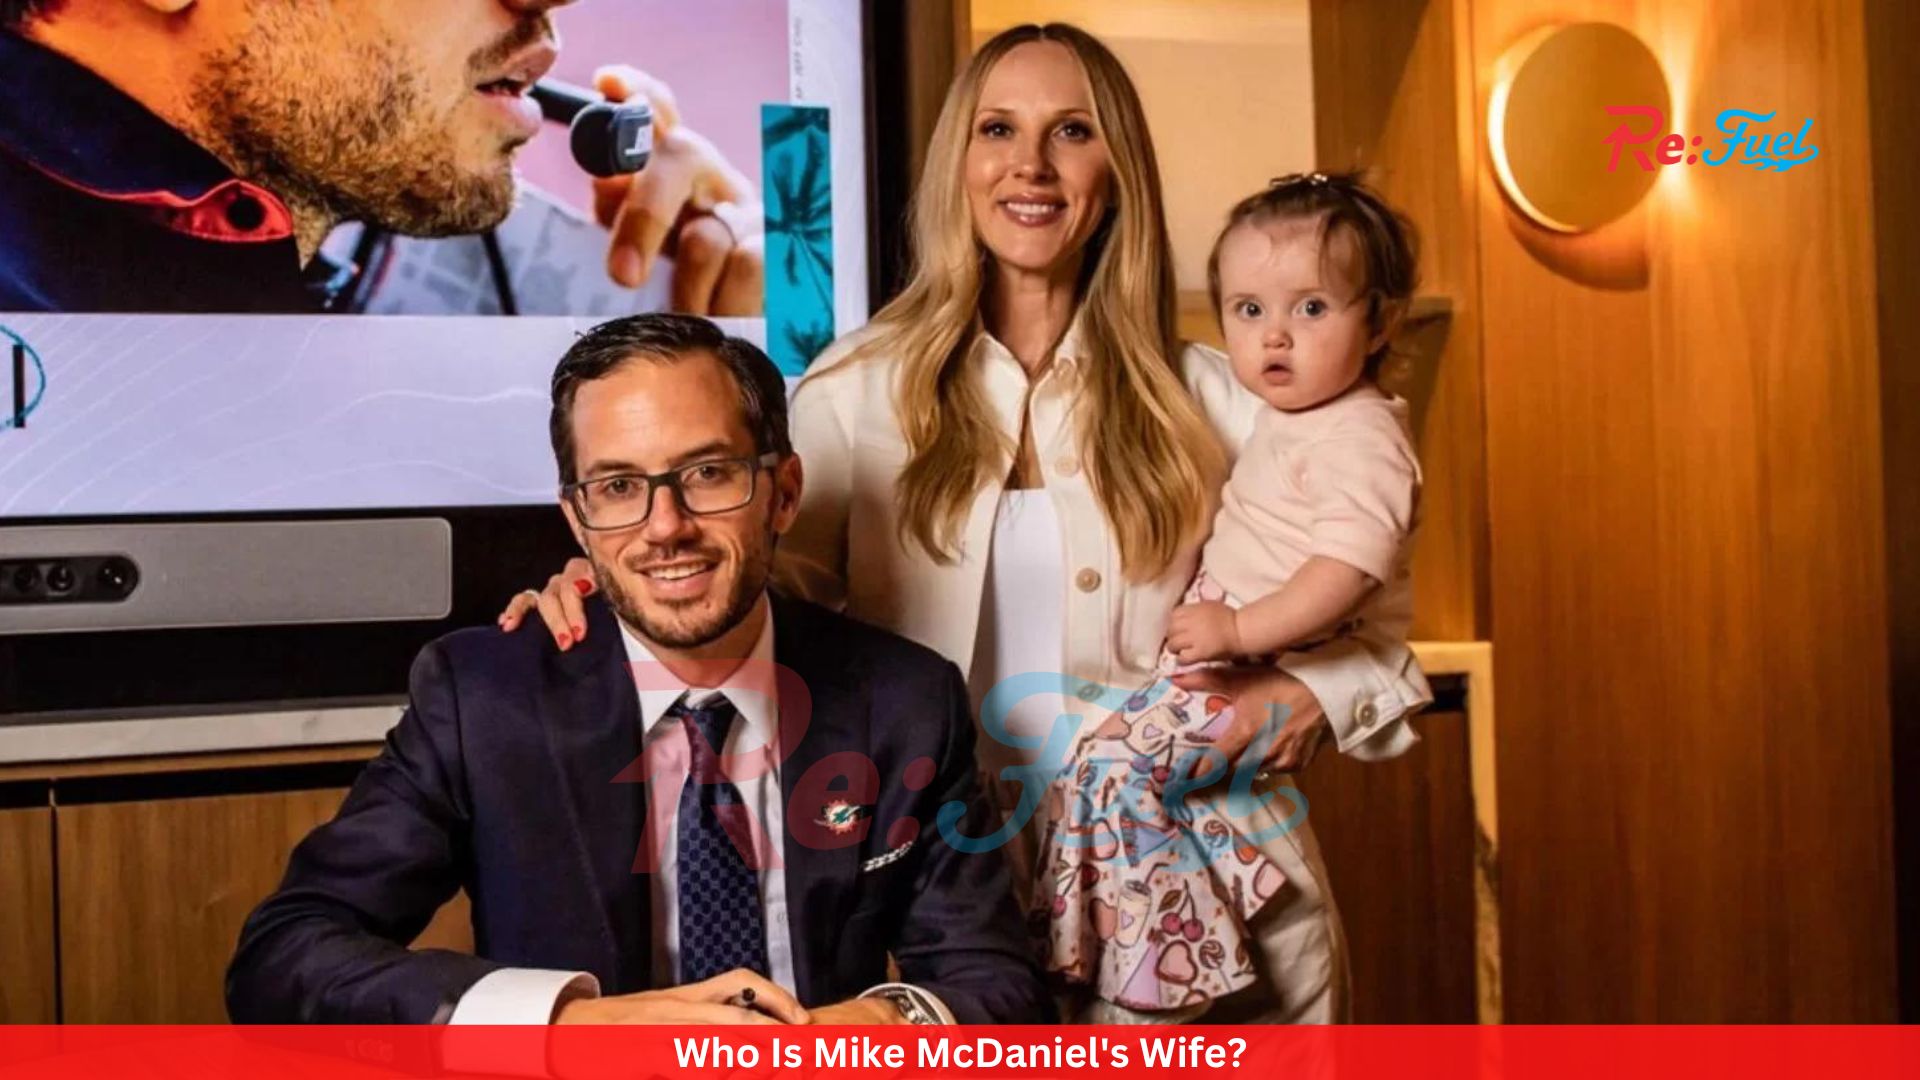 Who Is Mike McDaniel's Wife?